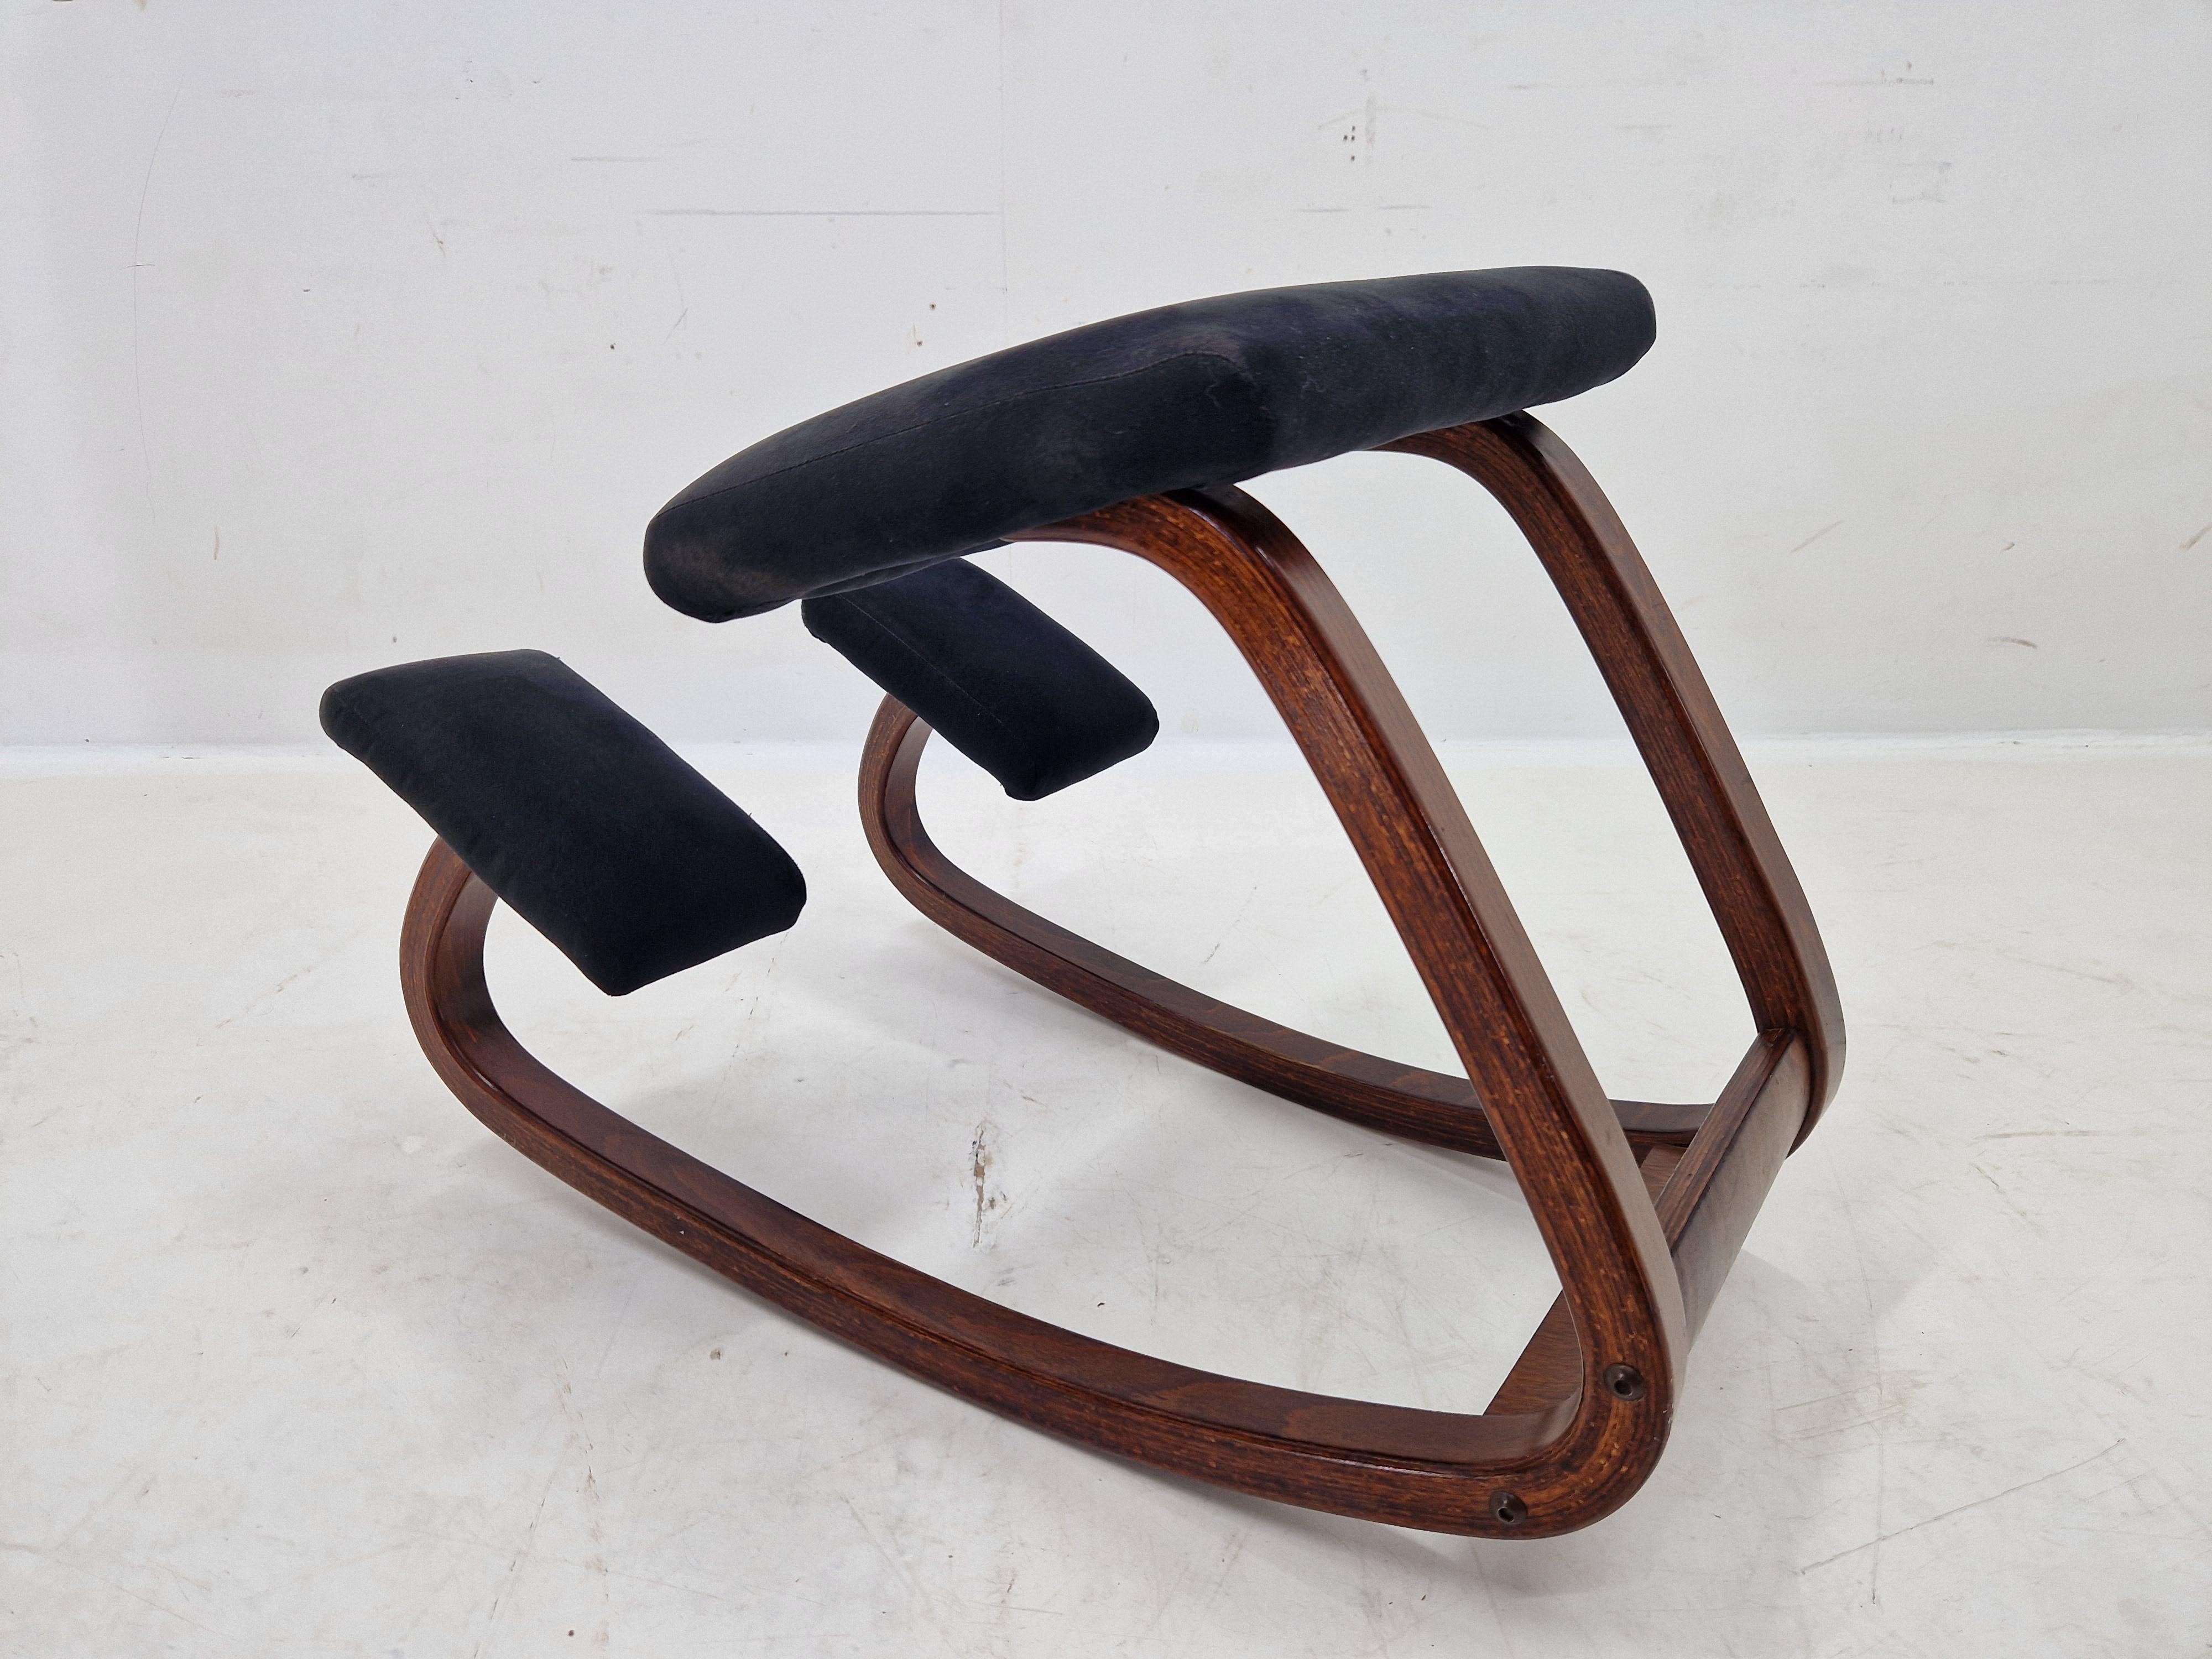 Fabric Rare Midcentury Balance Variable Knee Chair, Peter Opsvik, Norway, 1980s For Sale